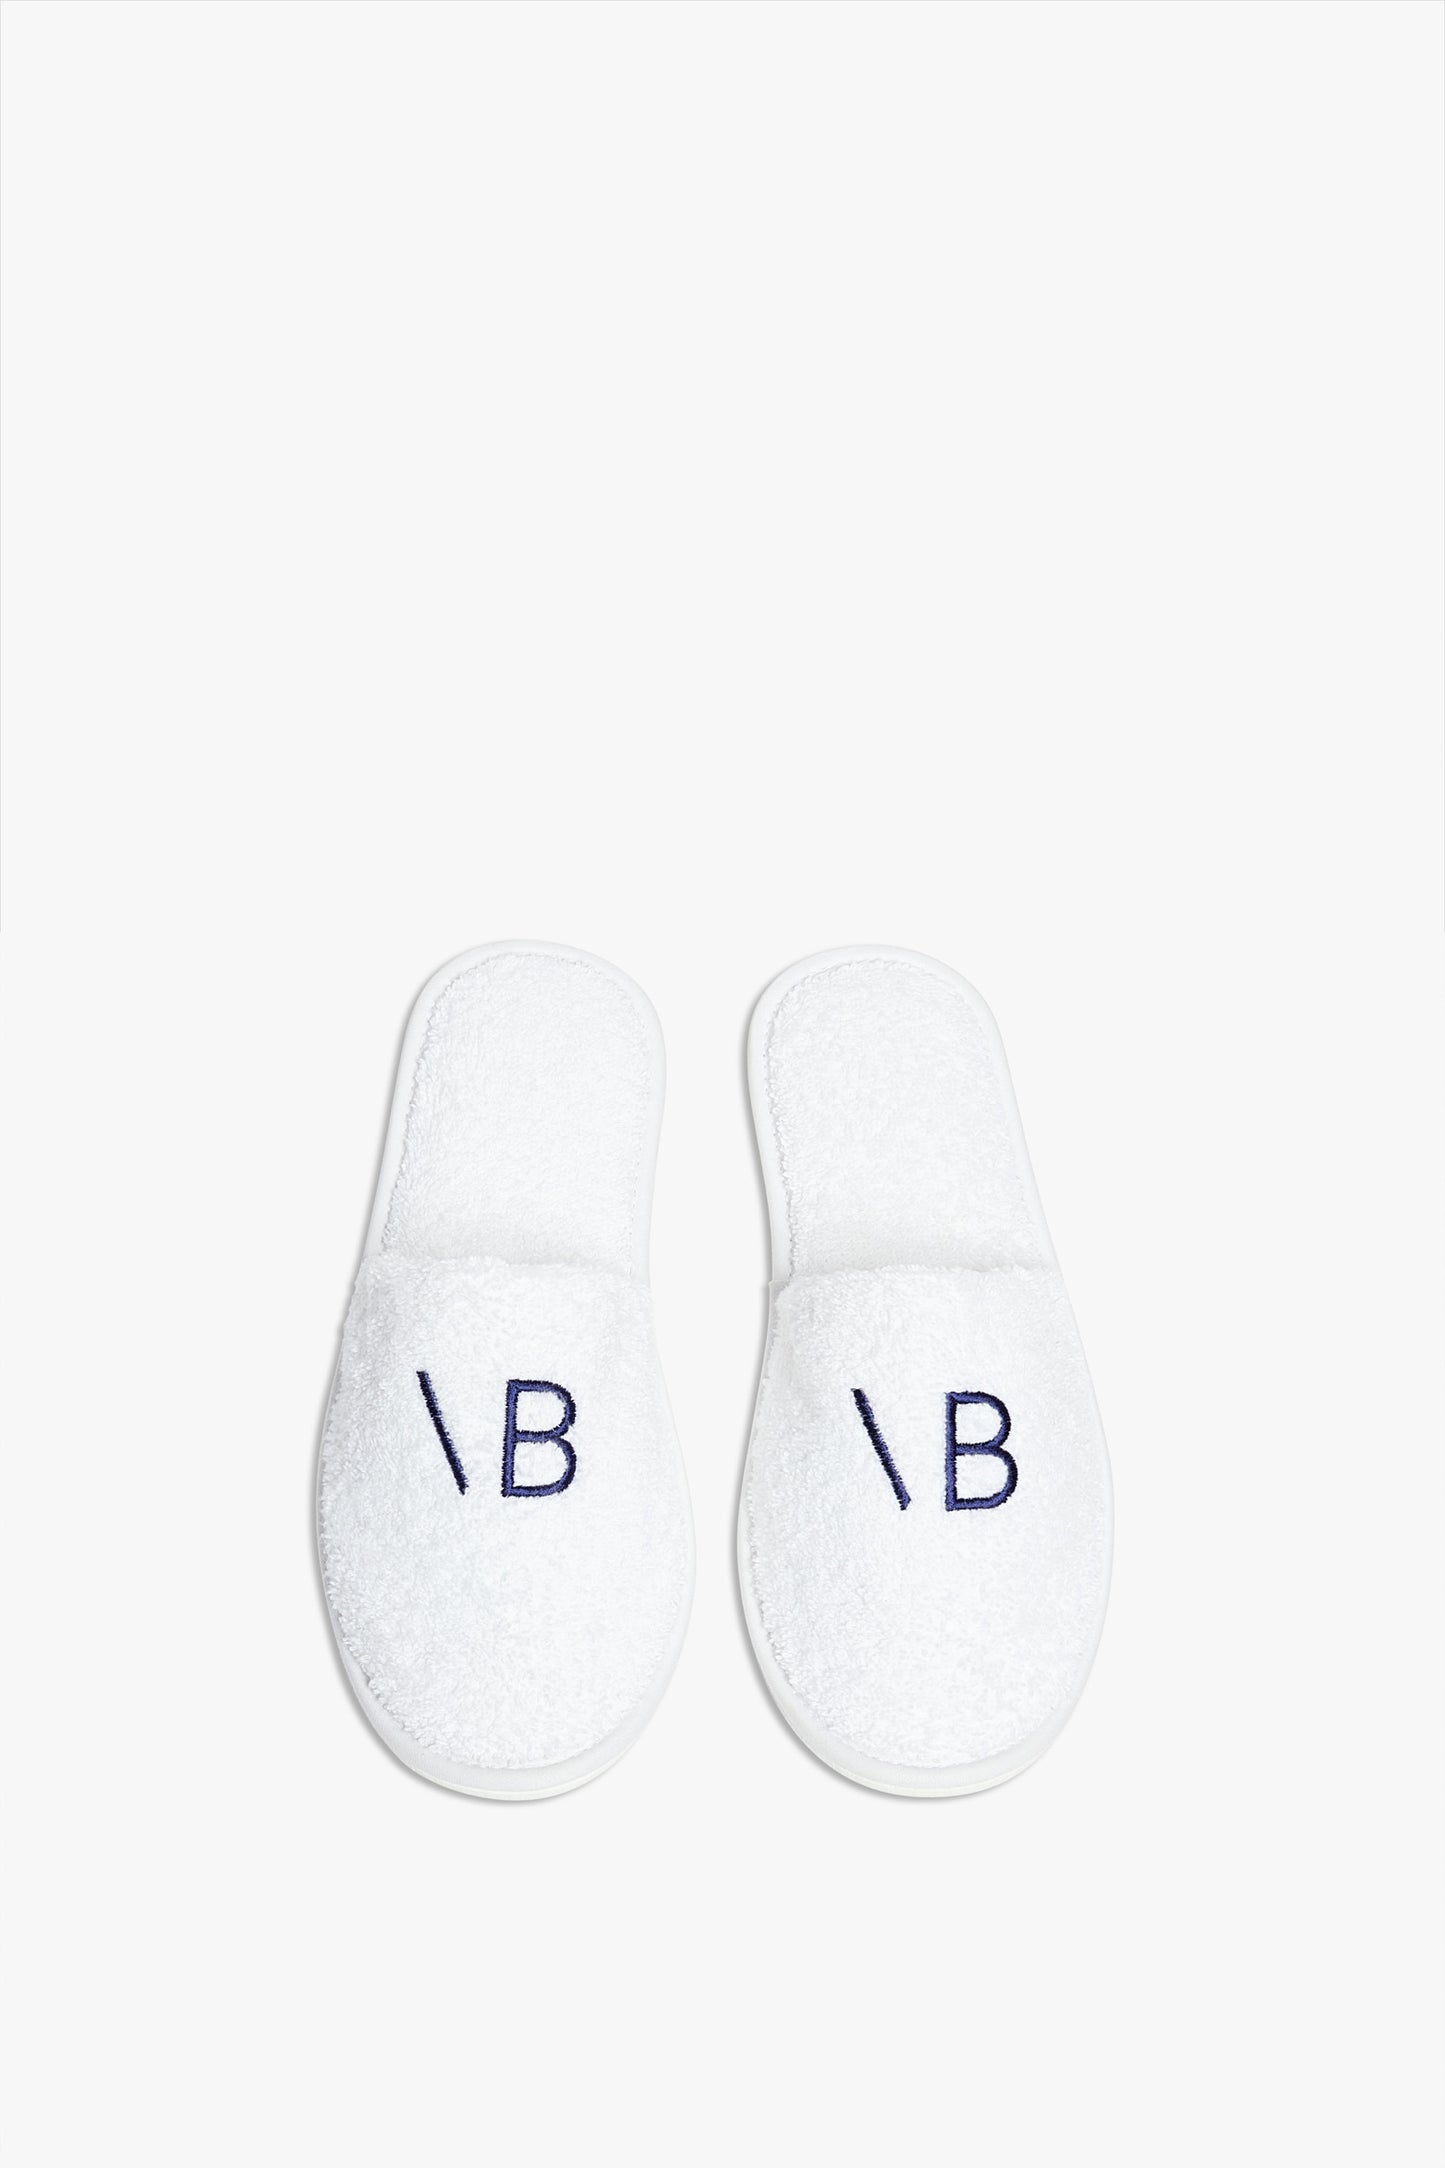 VB Embroidered Slippers In Navy-White